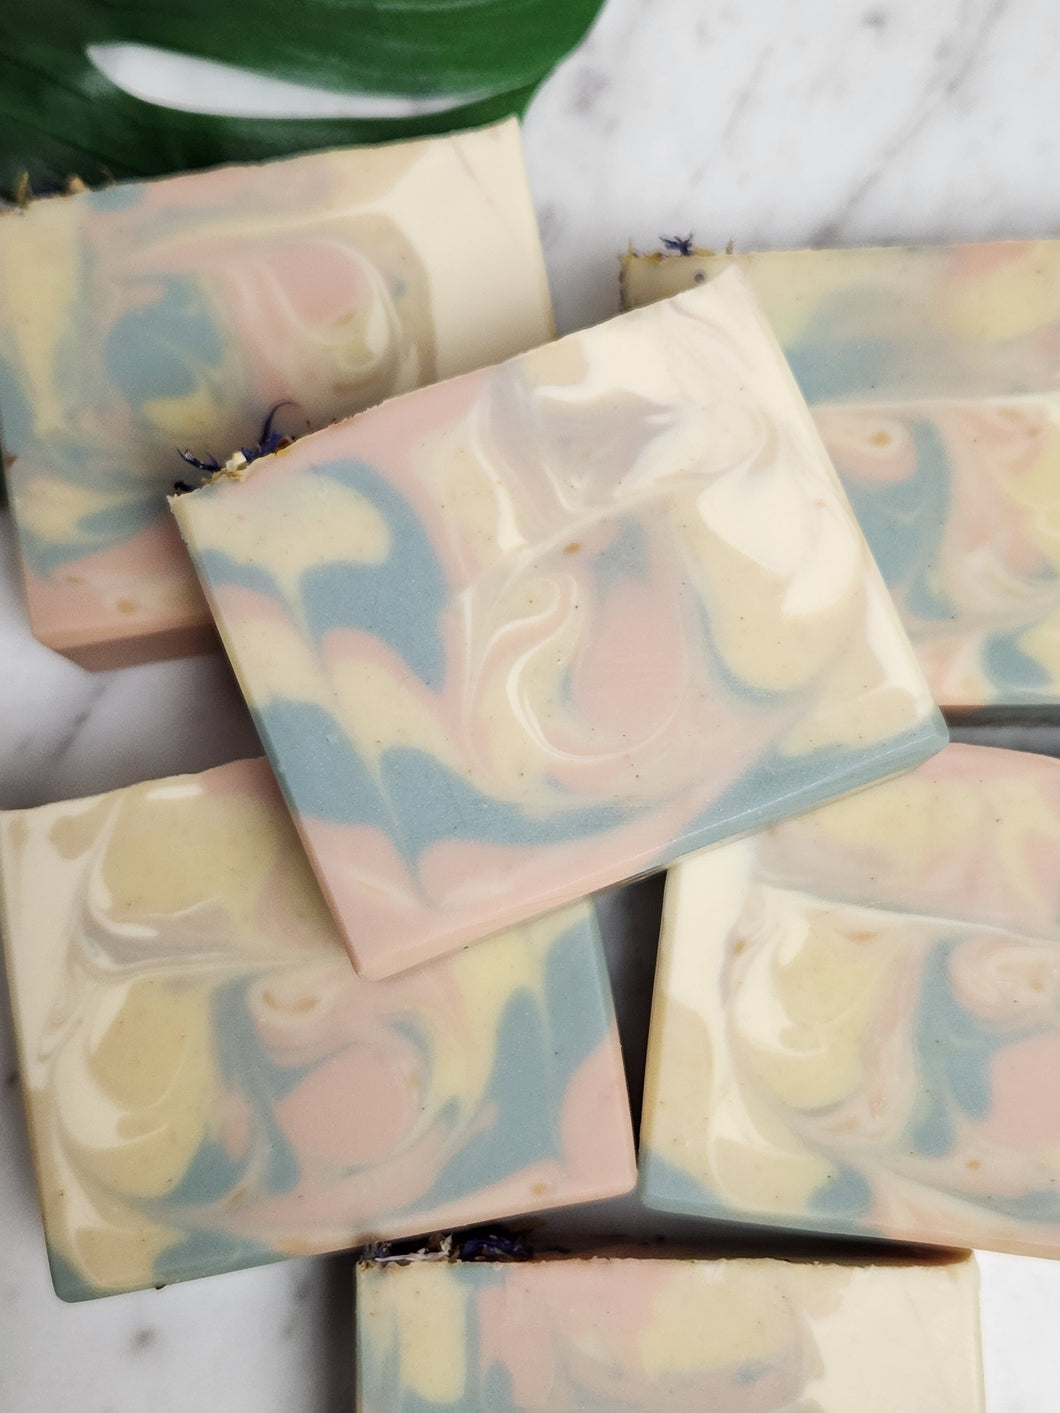 Floral Garden Earthly Soap Goods 